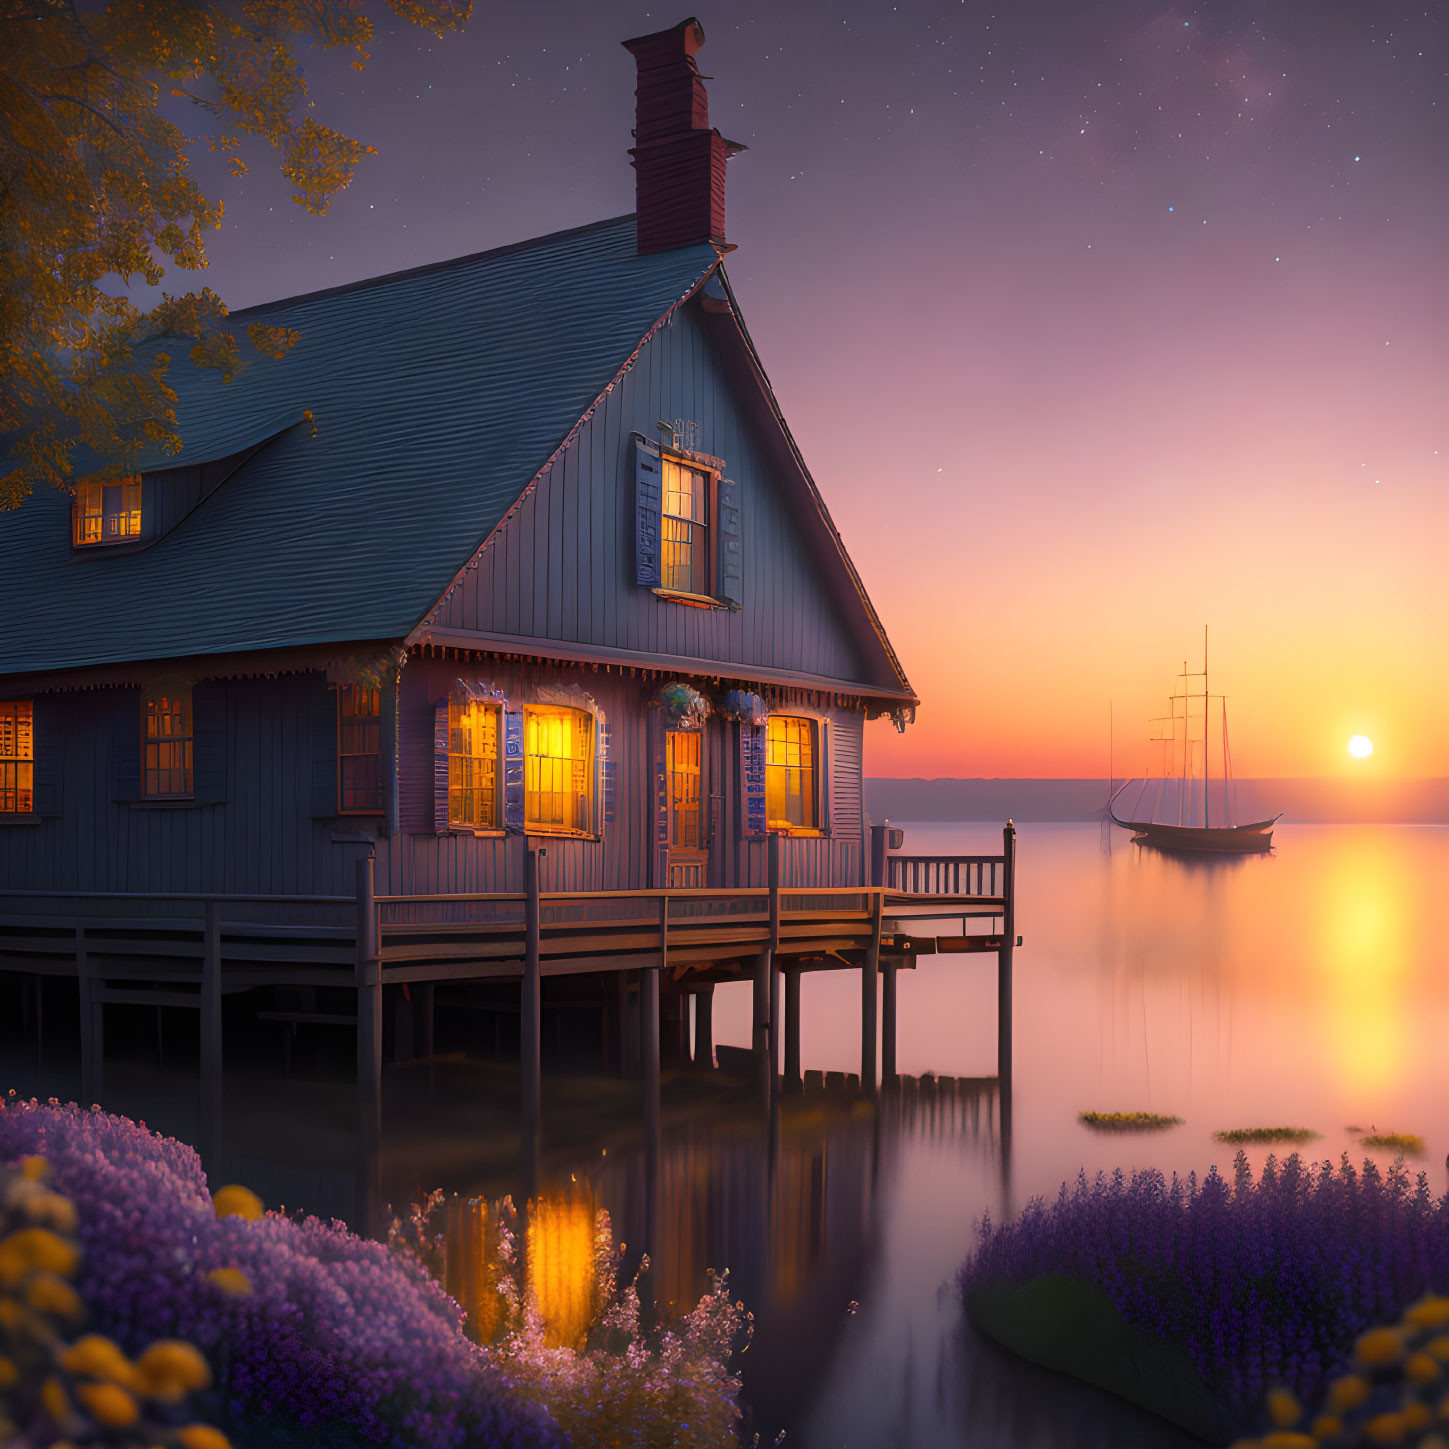 Tranquil lakeside house at twilight with dock, sailboat, and starlit sky